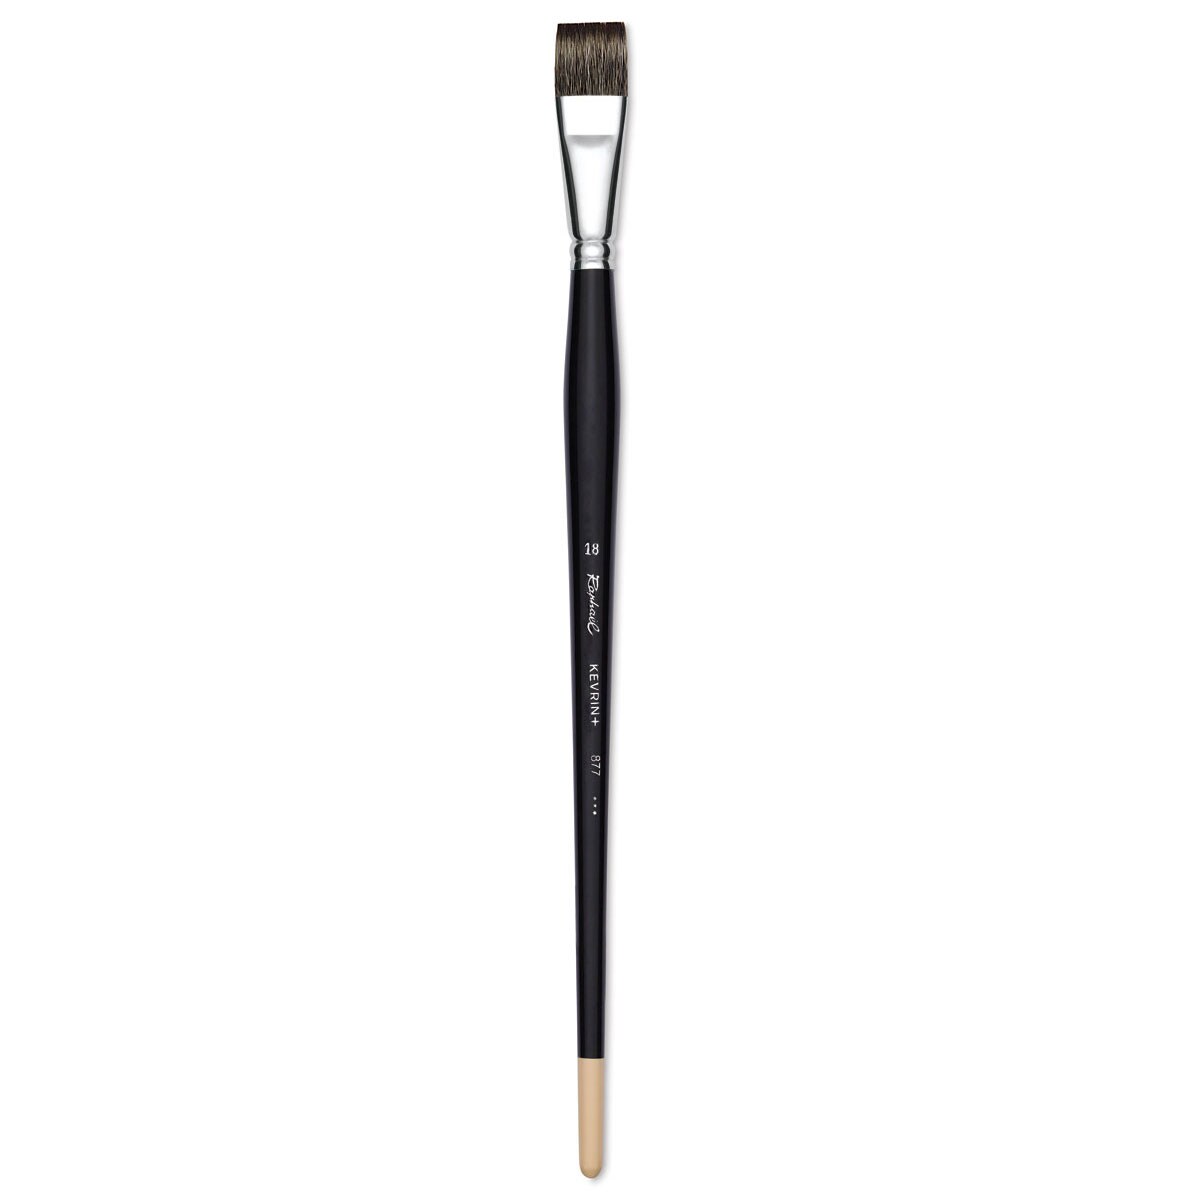 Rapha&#xEB;l Kevrin+ Brush - Bright, Long Handle, Size 18